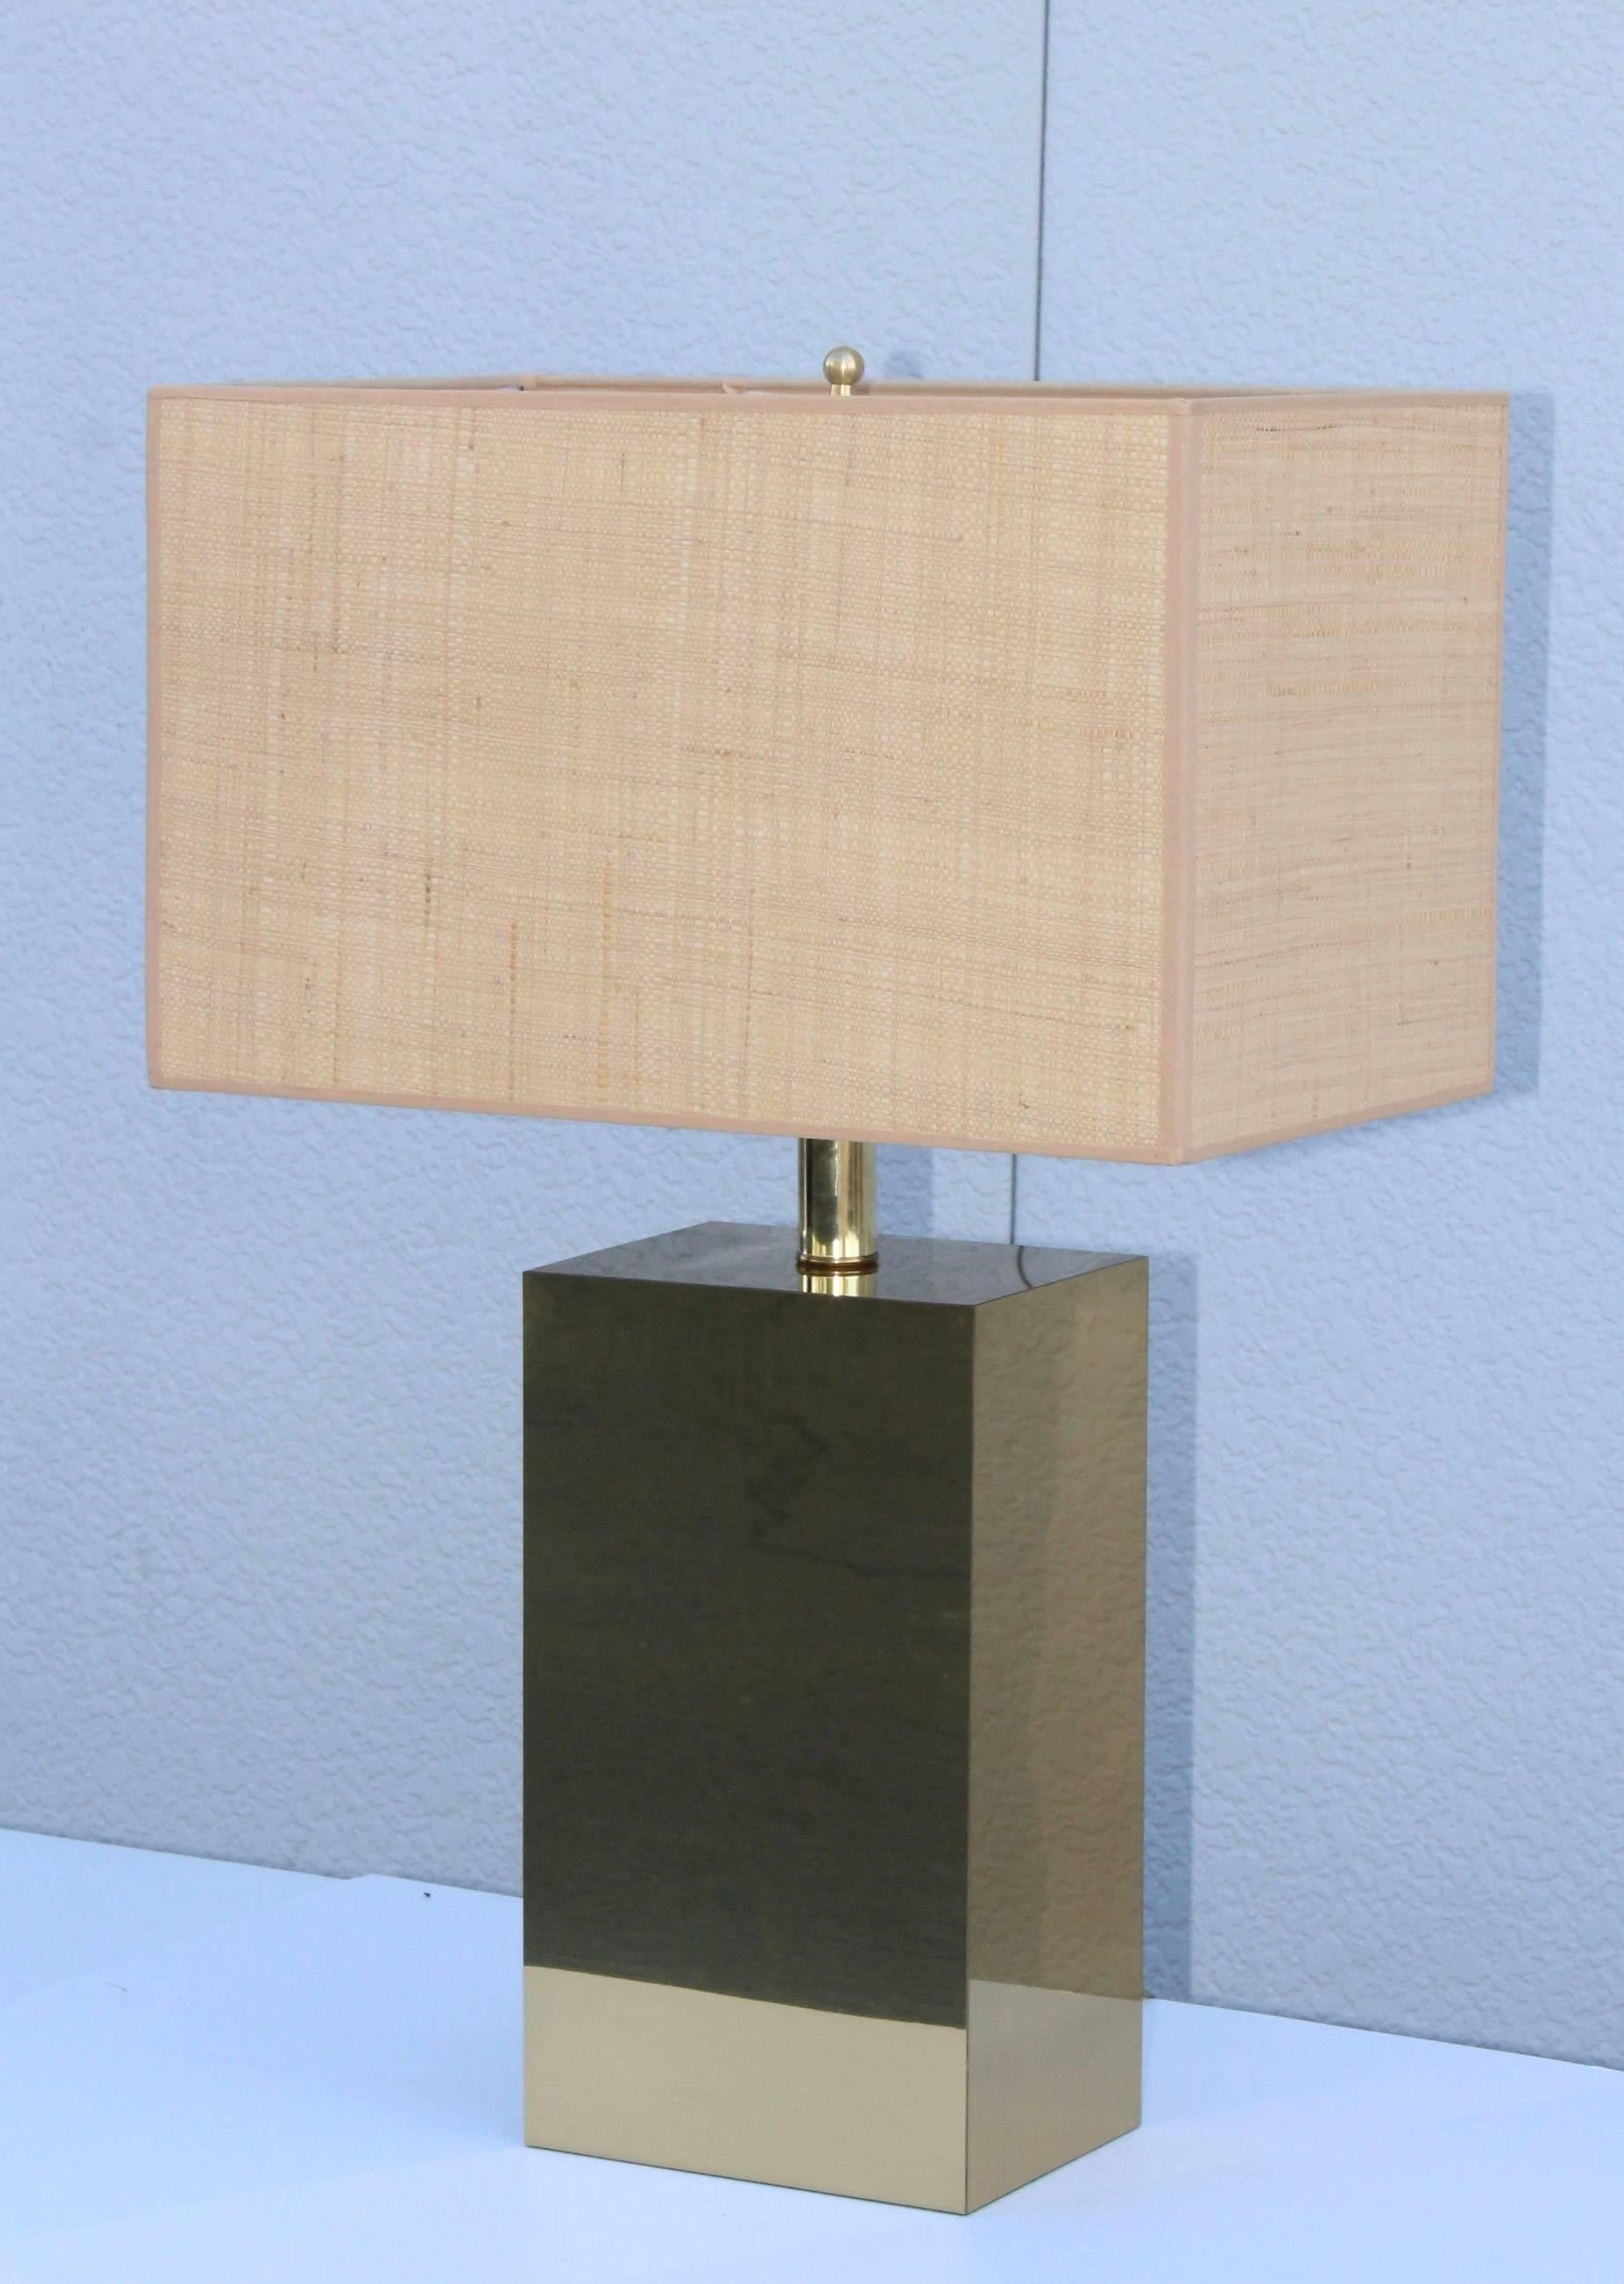 1970s modernist mirrored brass table lamp by George Kovacs.

Height to light socket 20'' 

Shade for photography only.